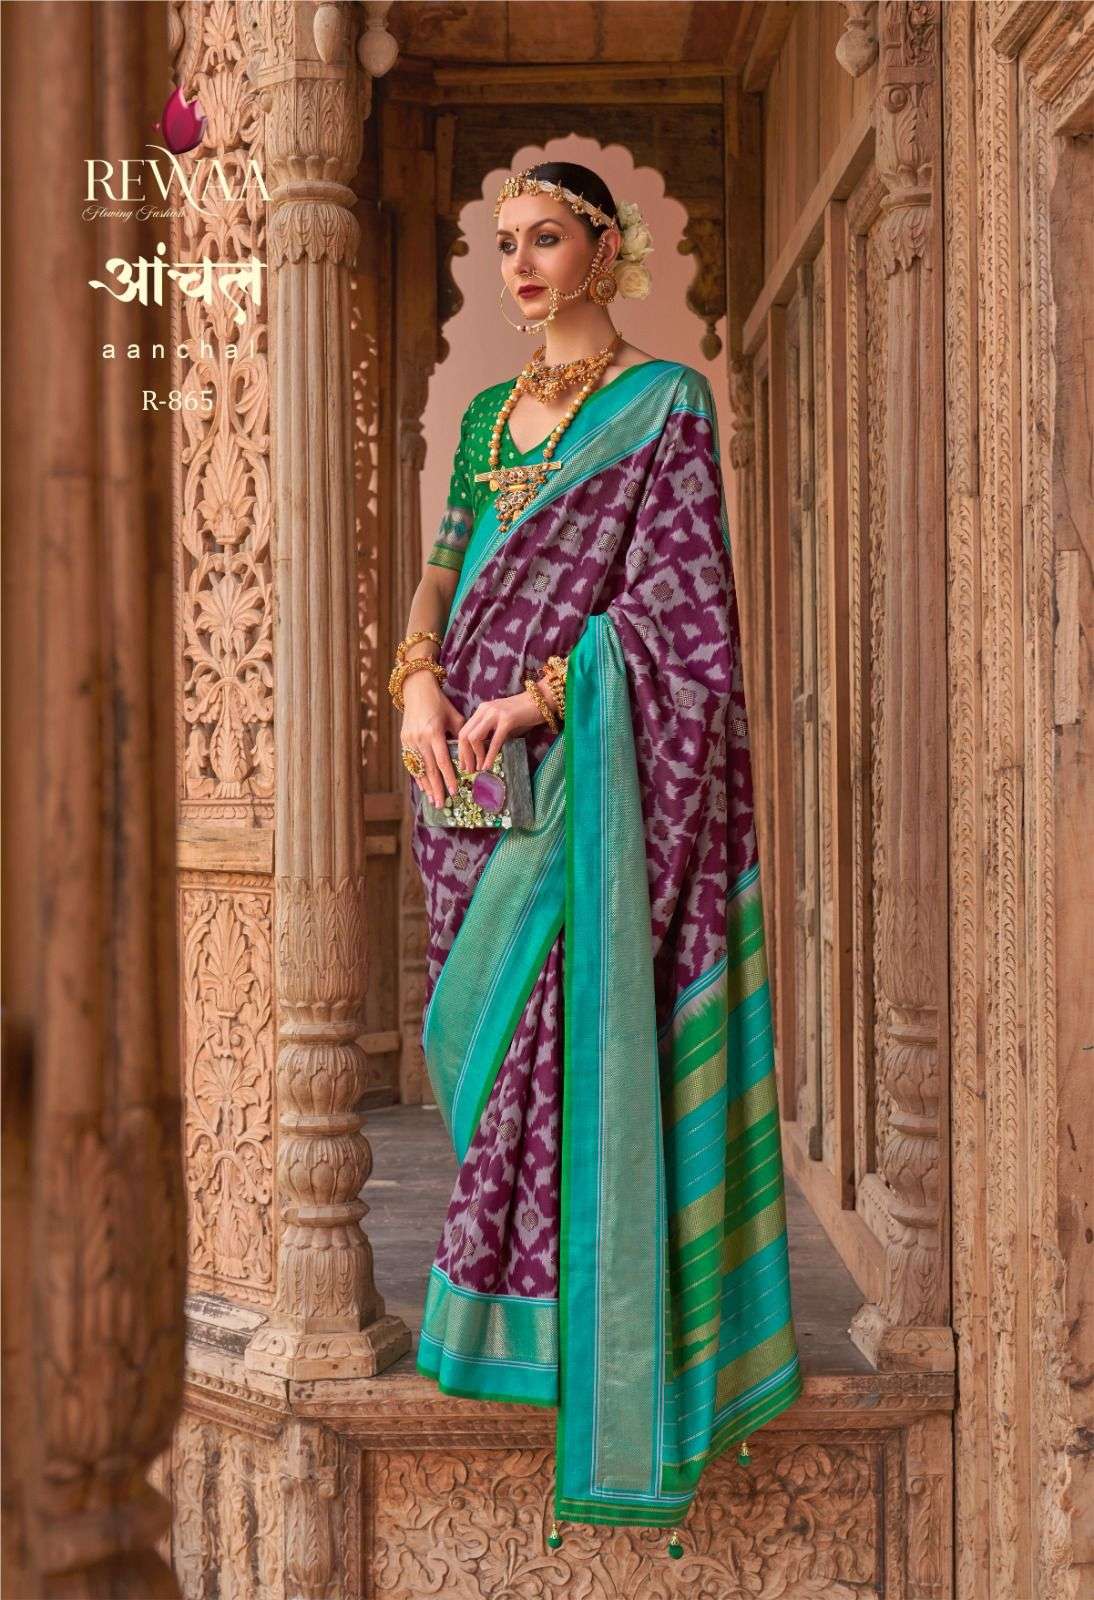 Aanchal By Rewaa 858 To 869 Series Indian Traditional Wear Collection Beautiful Stylish Fancy Colorful Party Wear & Occasional Wear Silk Sarees At Wholesale Price